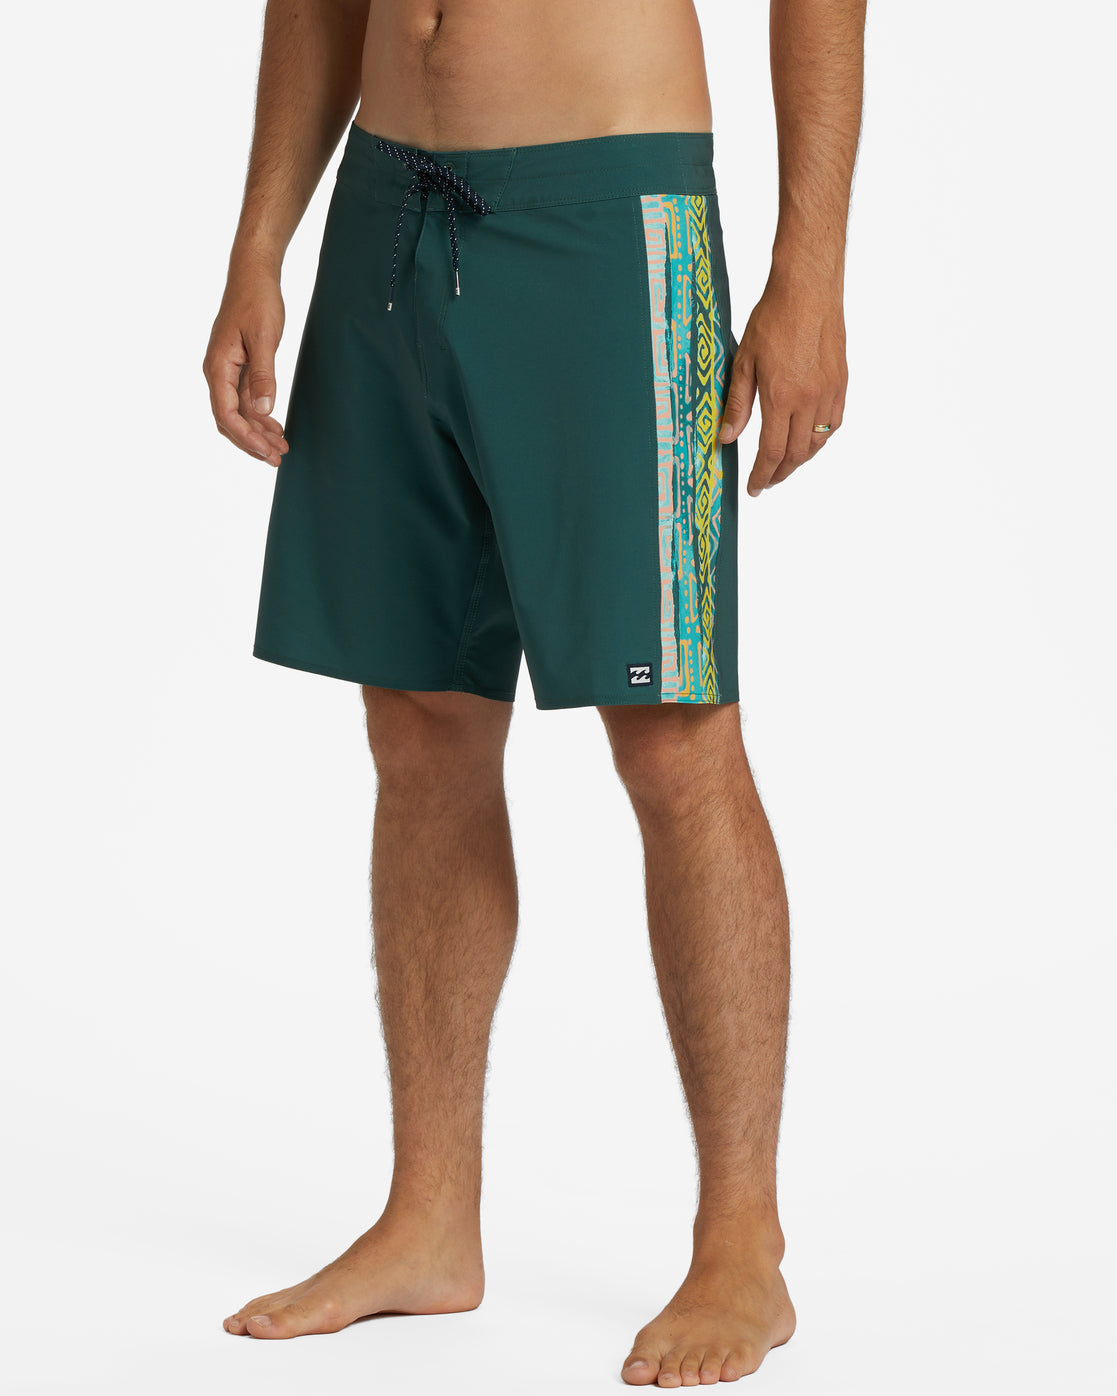 D Bah Ciclo Pro Performance 18" Boardshorts - Cypress